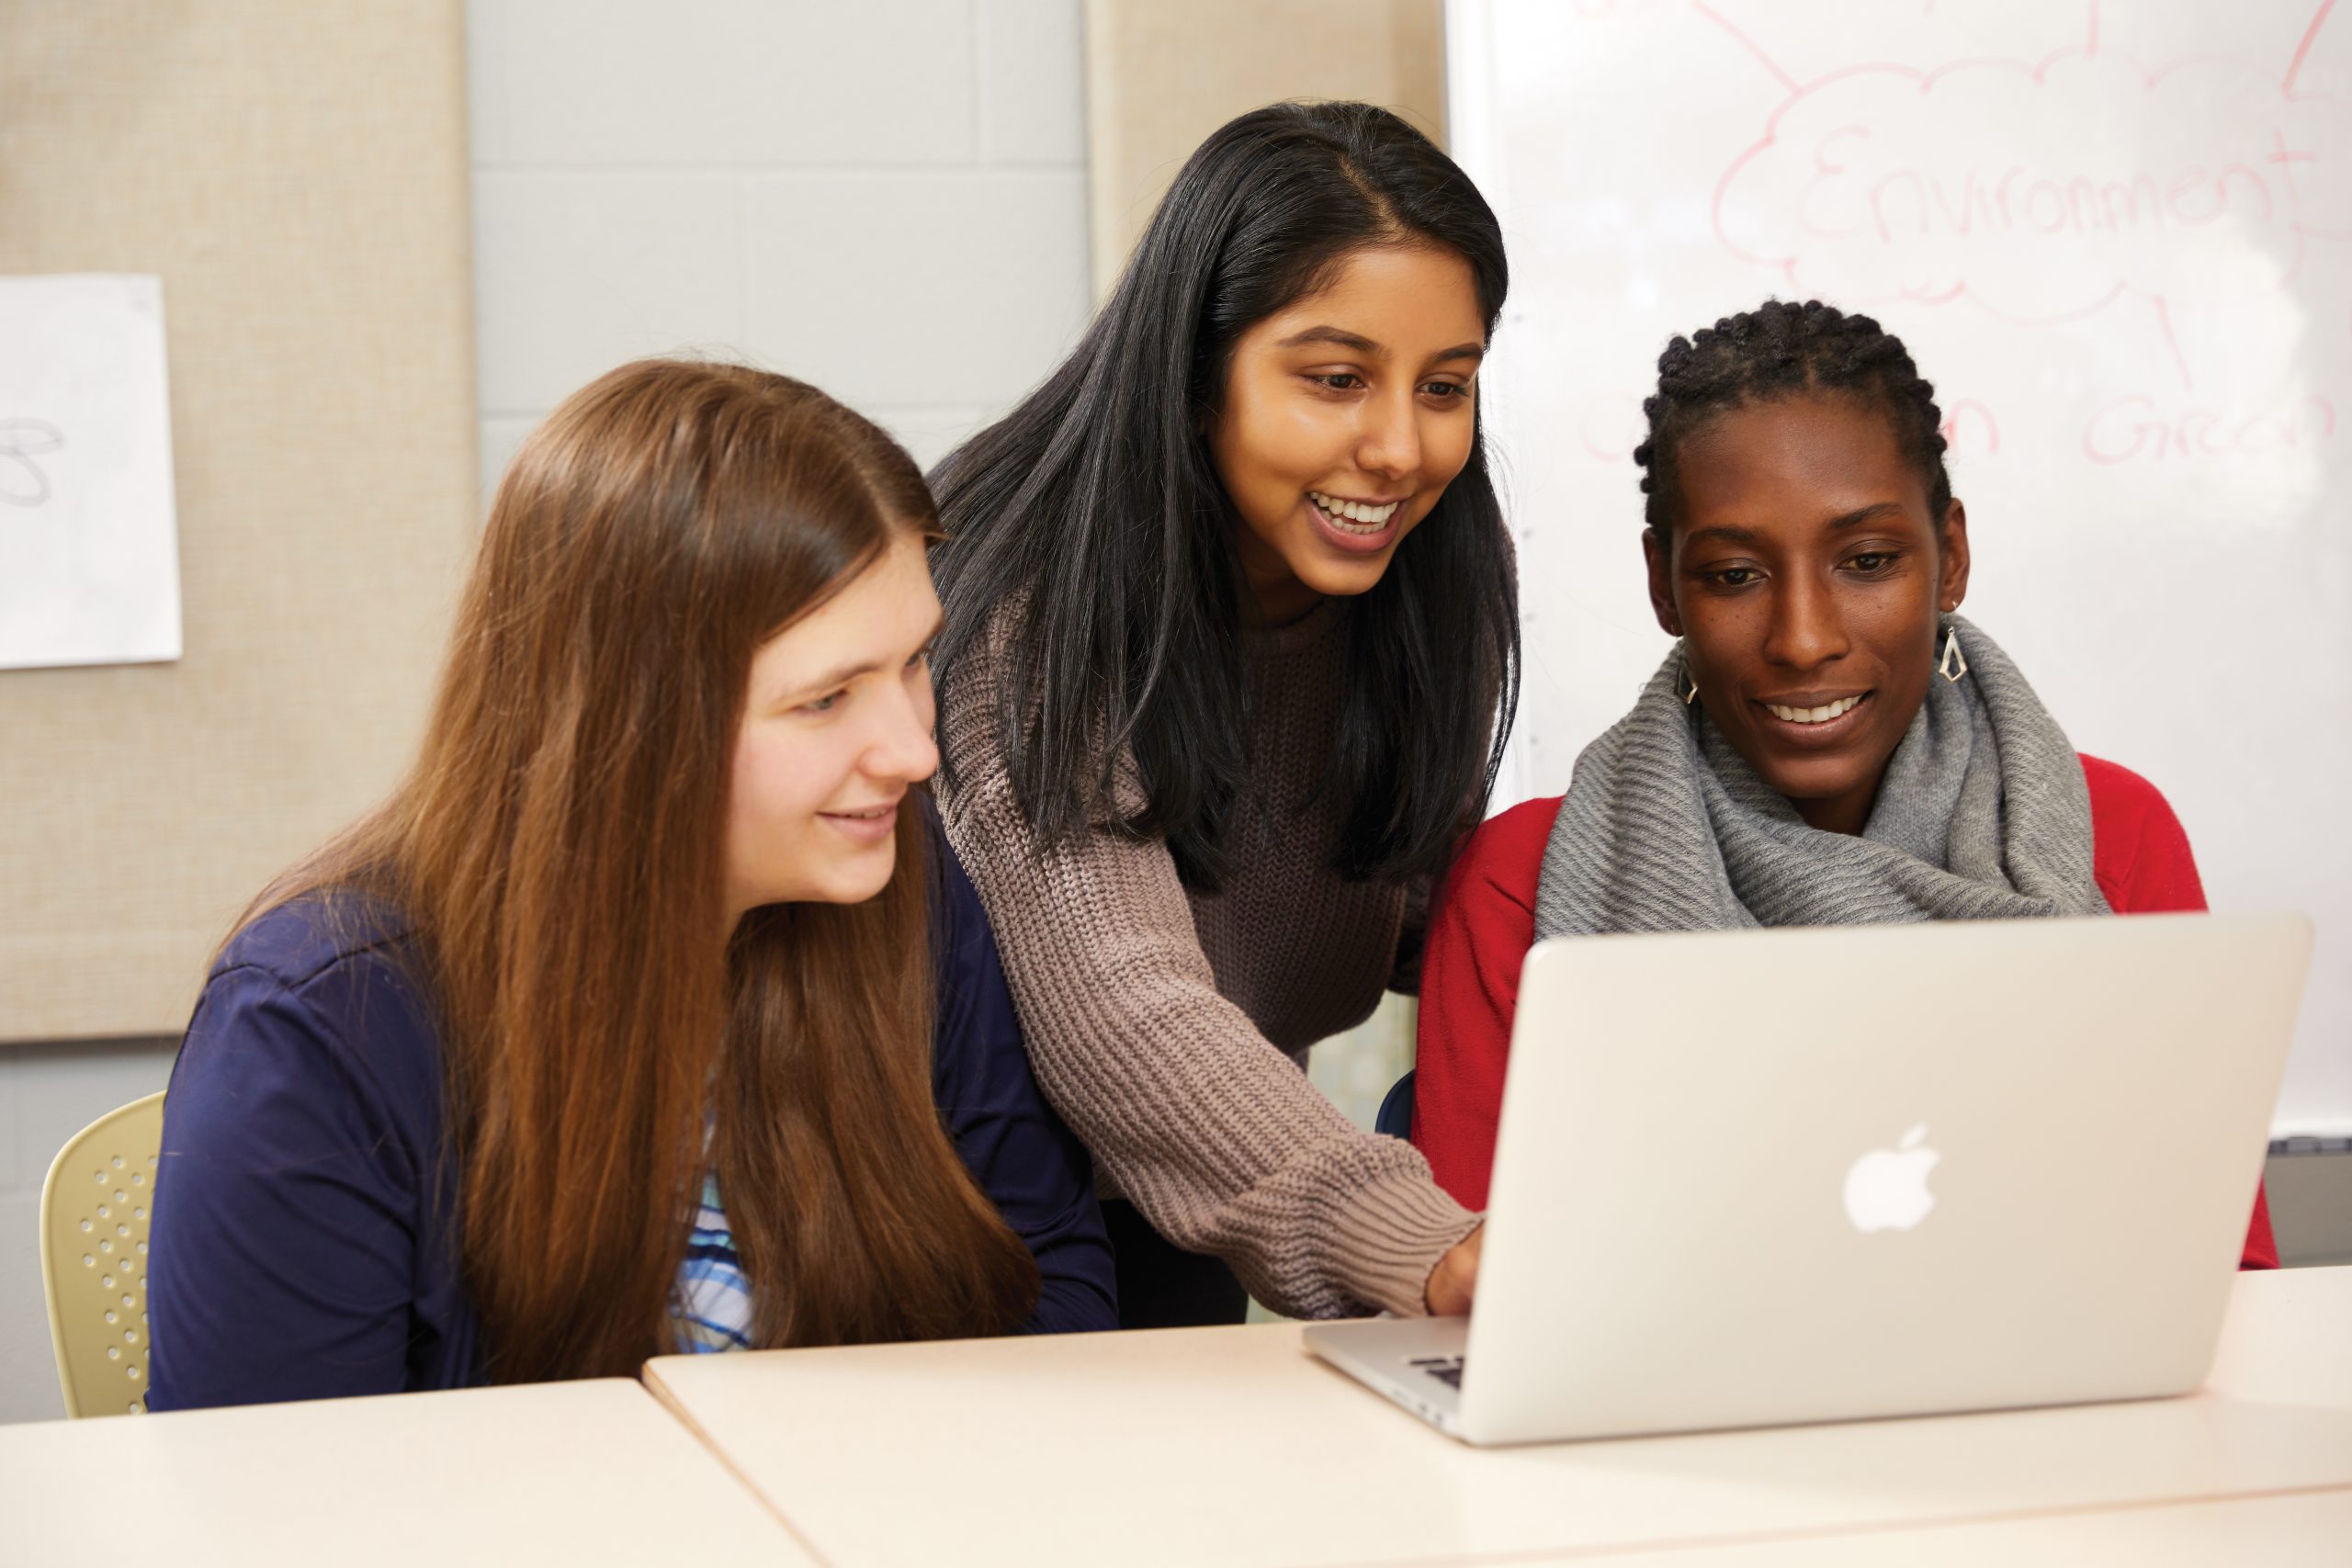 Three students looking at a laptop together